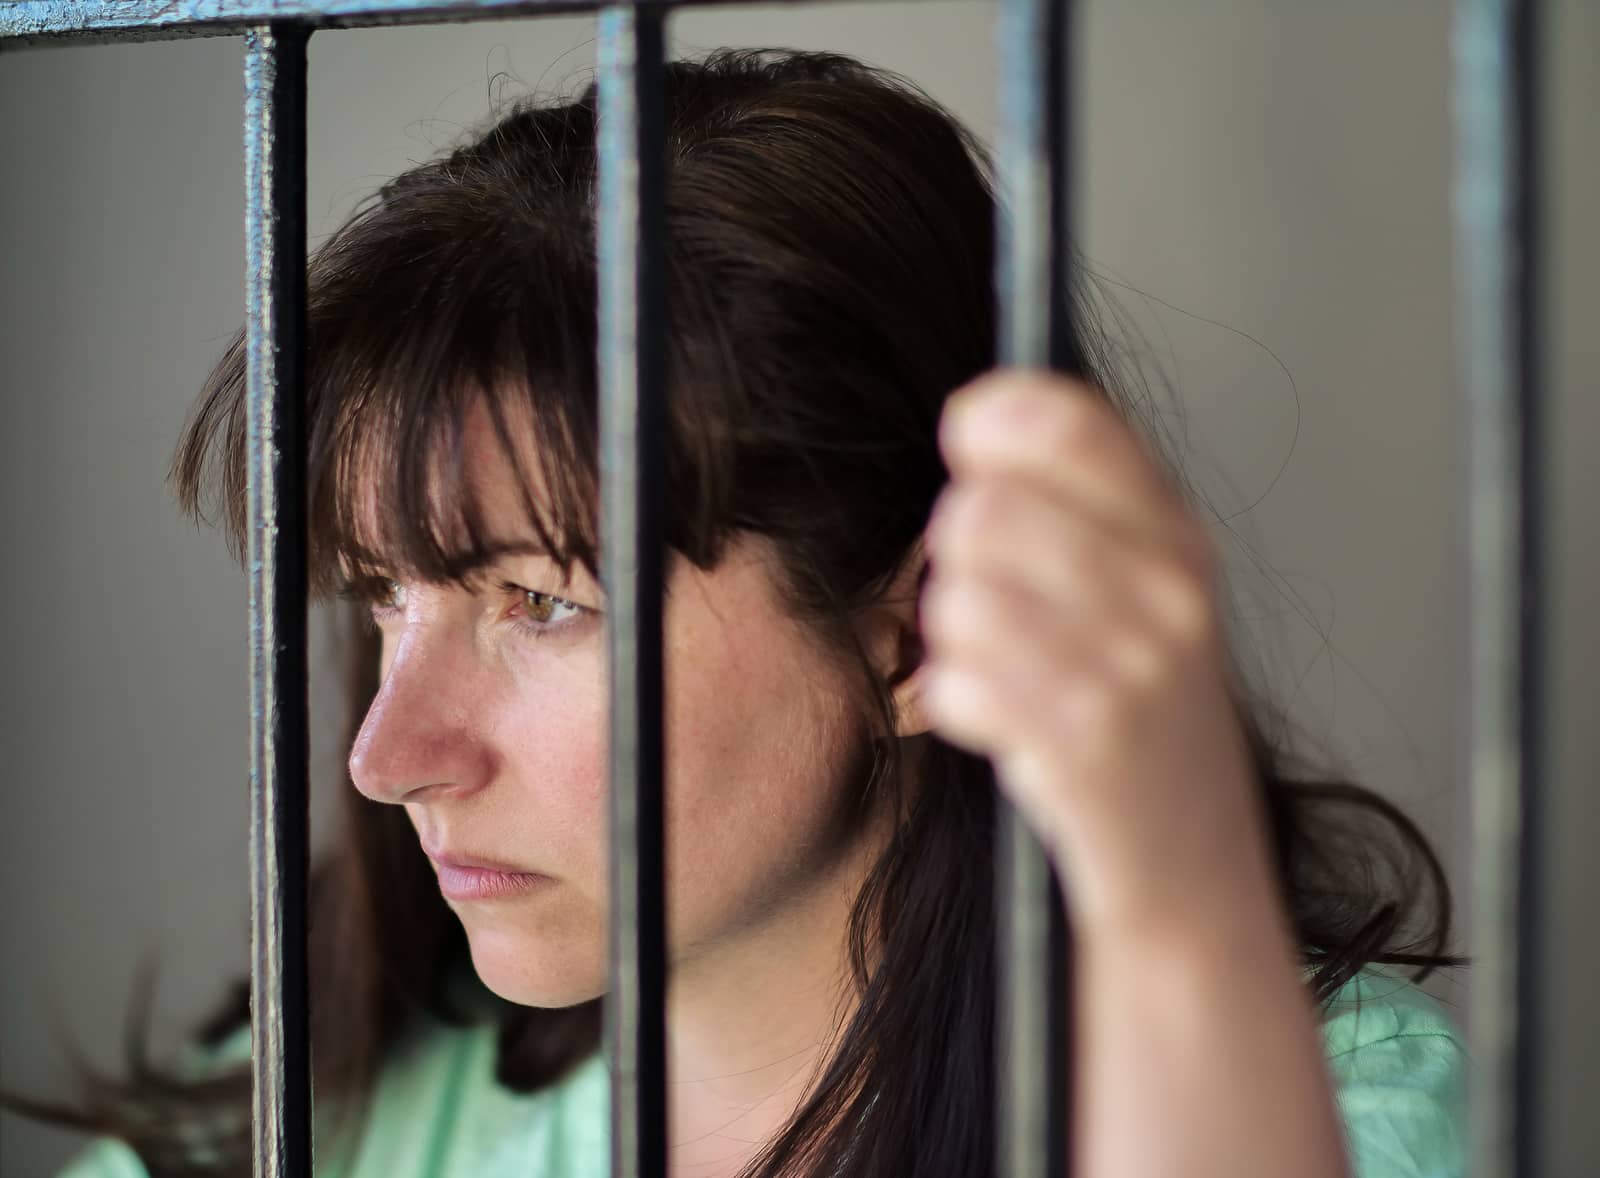 The girl is imprisoned in jail, behind bars.